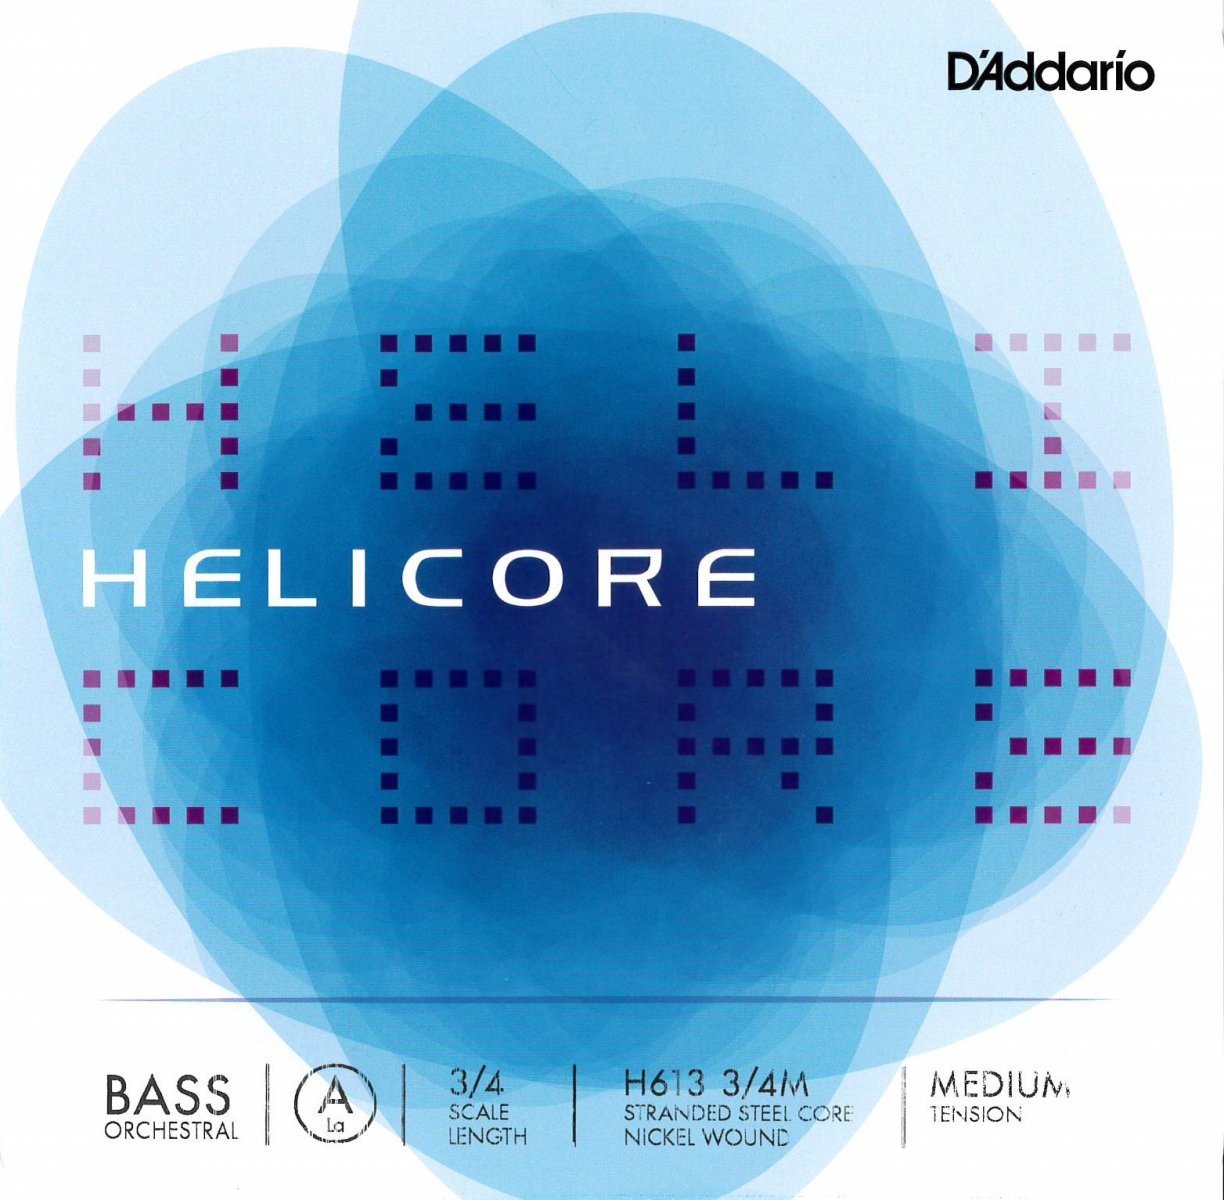 【Helicore Orchestra】ﾍﾘｺｱｵｰｹｽﾄﾗ-D'addario- - I Love Strings 